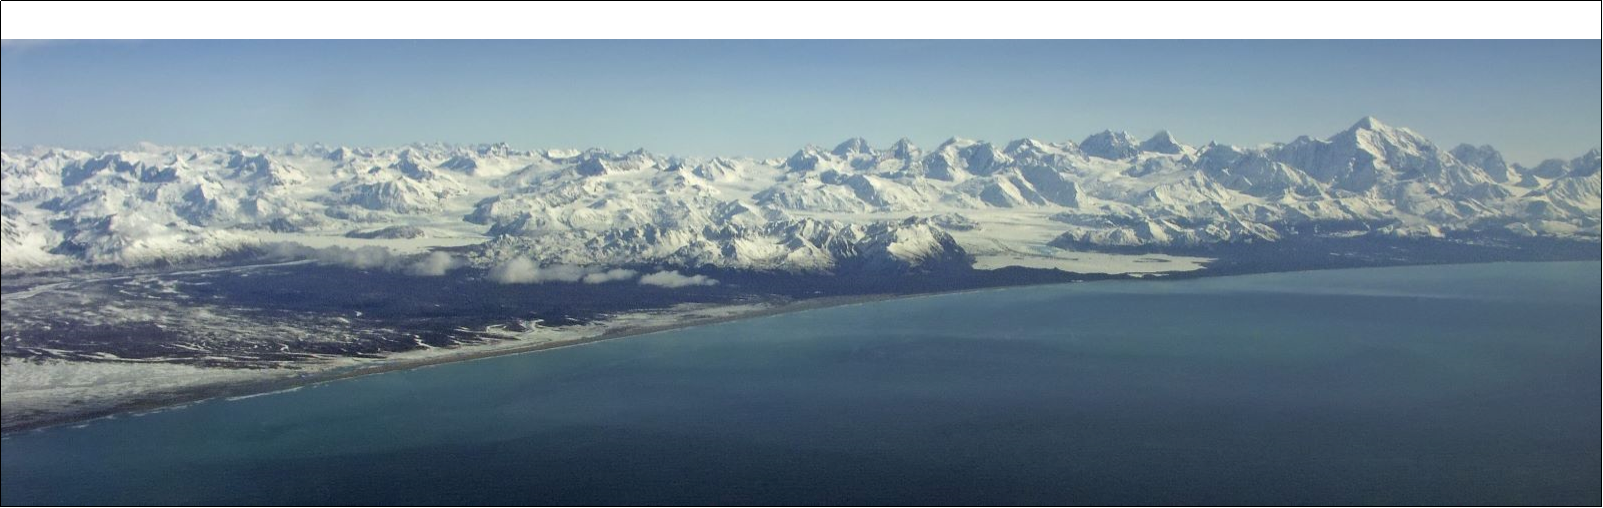 Fairweather Range with many snow-capped mountains and a gulf in foreground